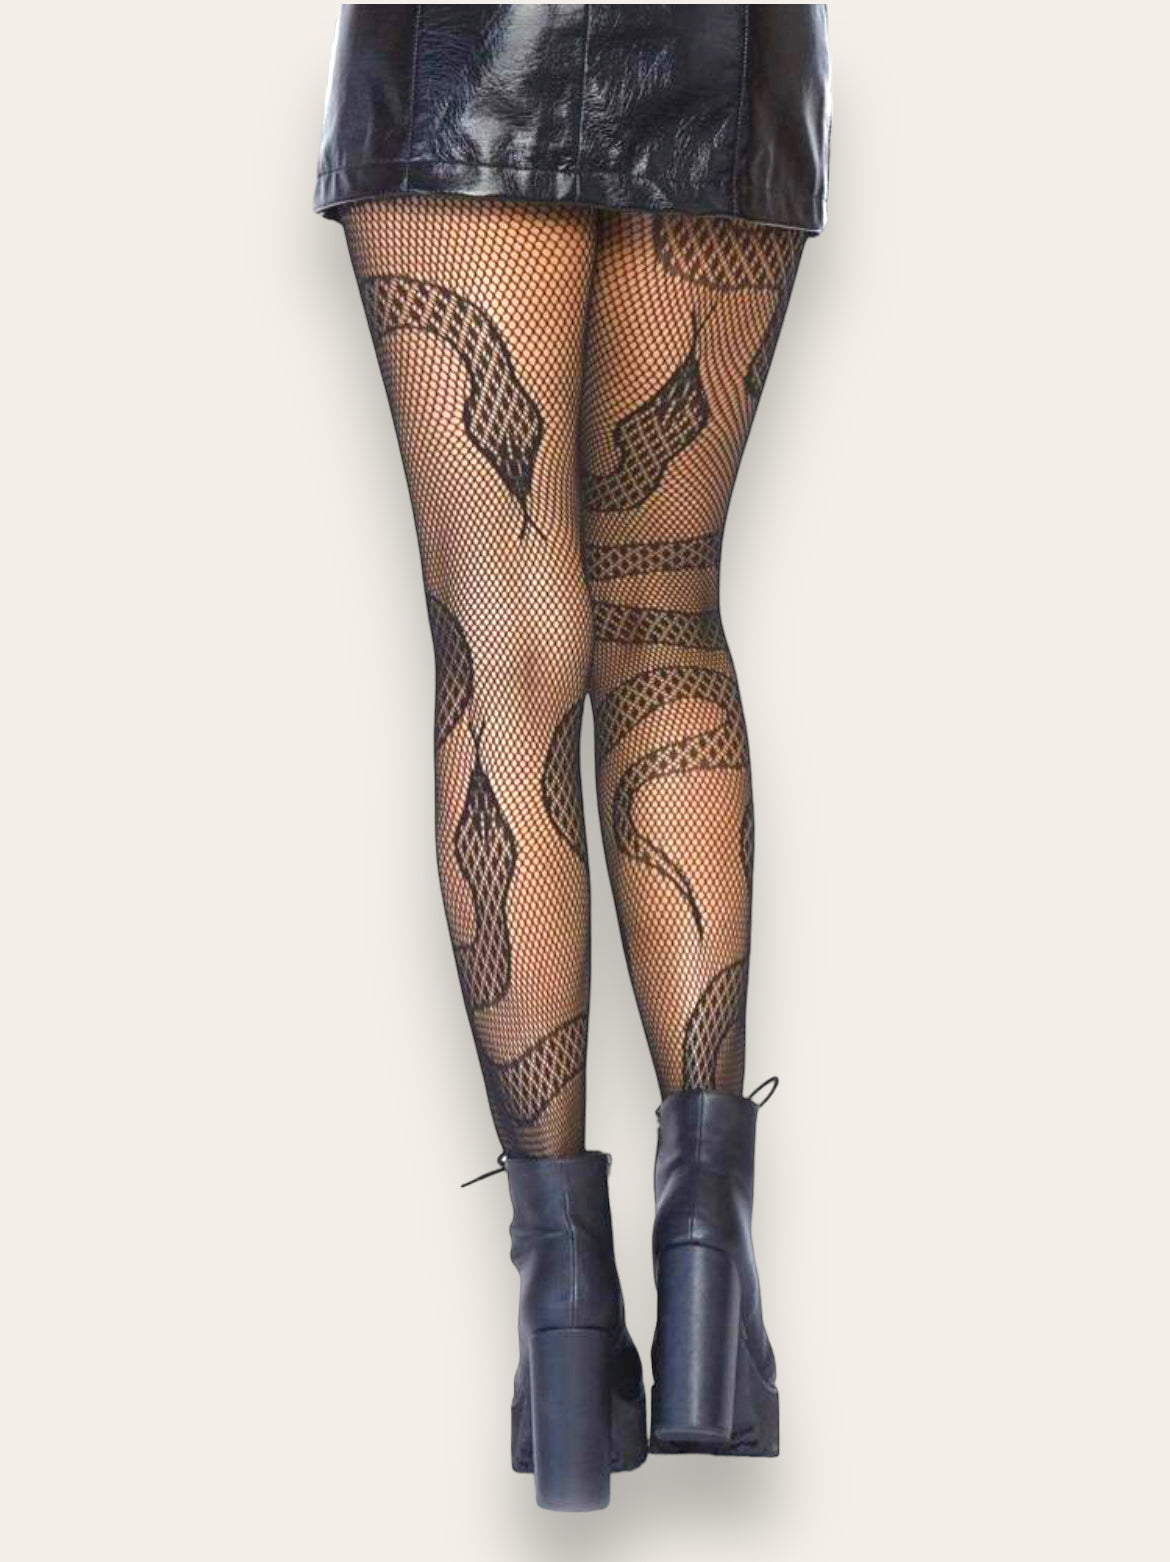 Fishnet tights with snake design